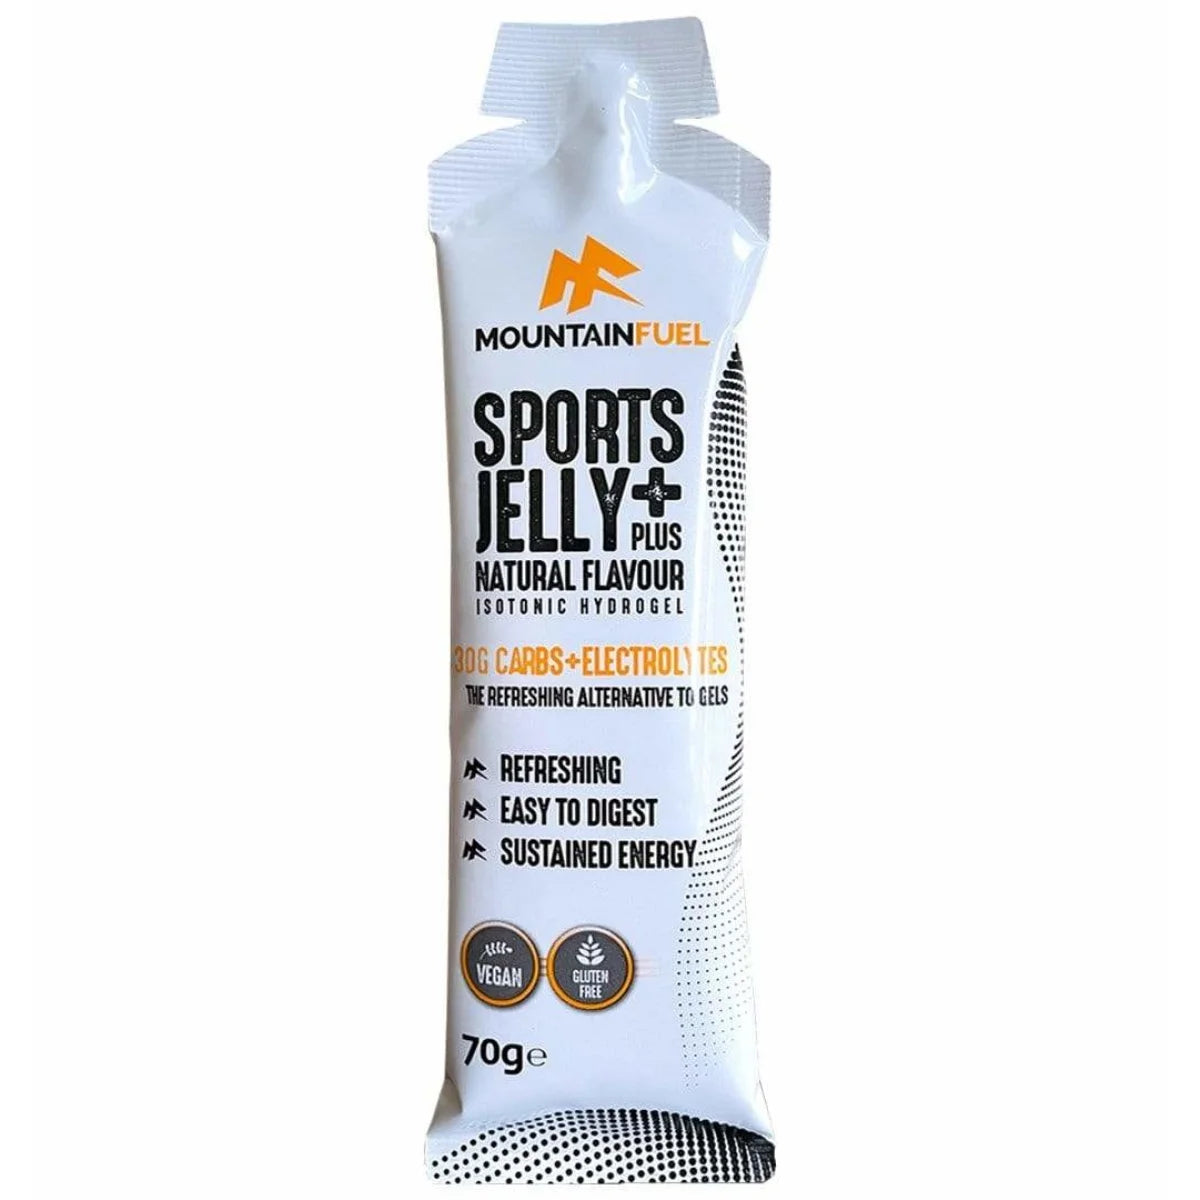 Mountain Fuel Sports Jelly+ Natural Flavour Isotonic Hydrogel